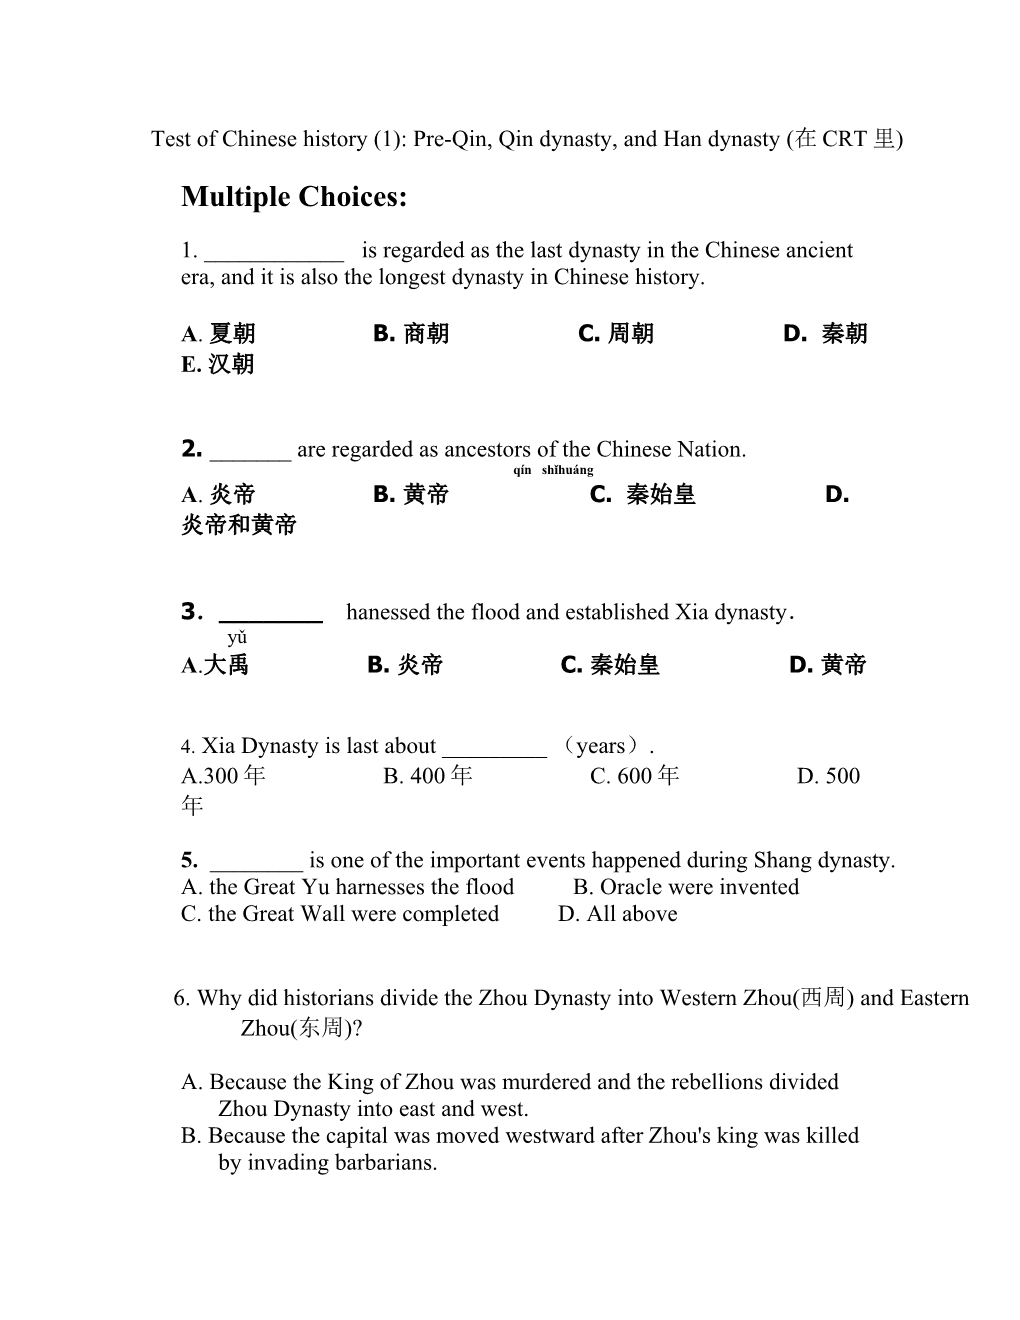 Test of Chinese History (1): Pre-Qin, Qin Dynasty, and Han Dynasty